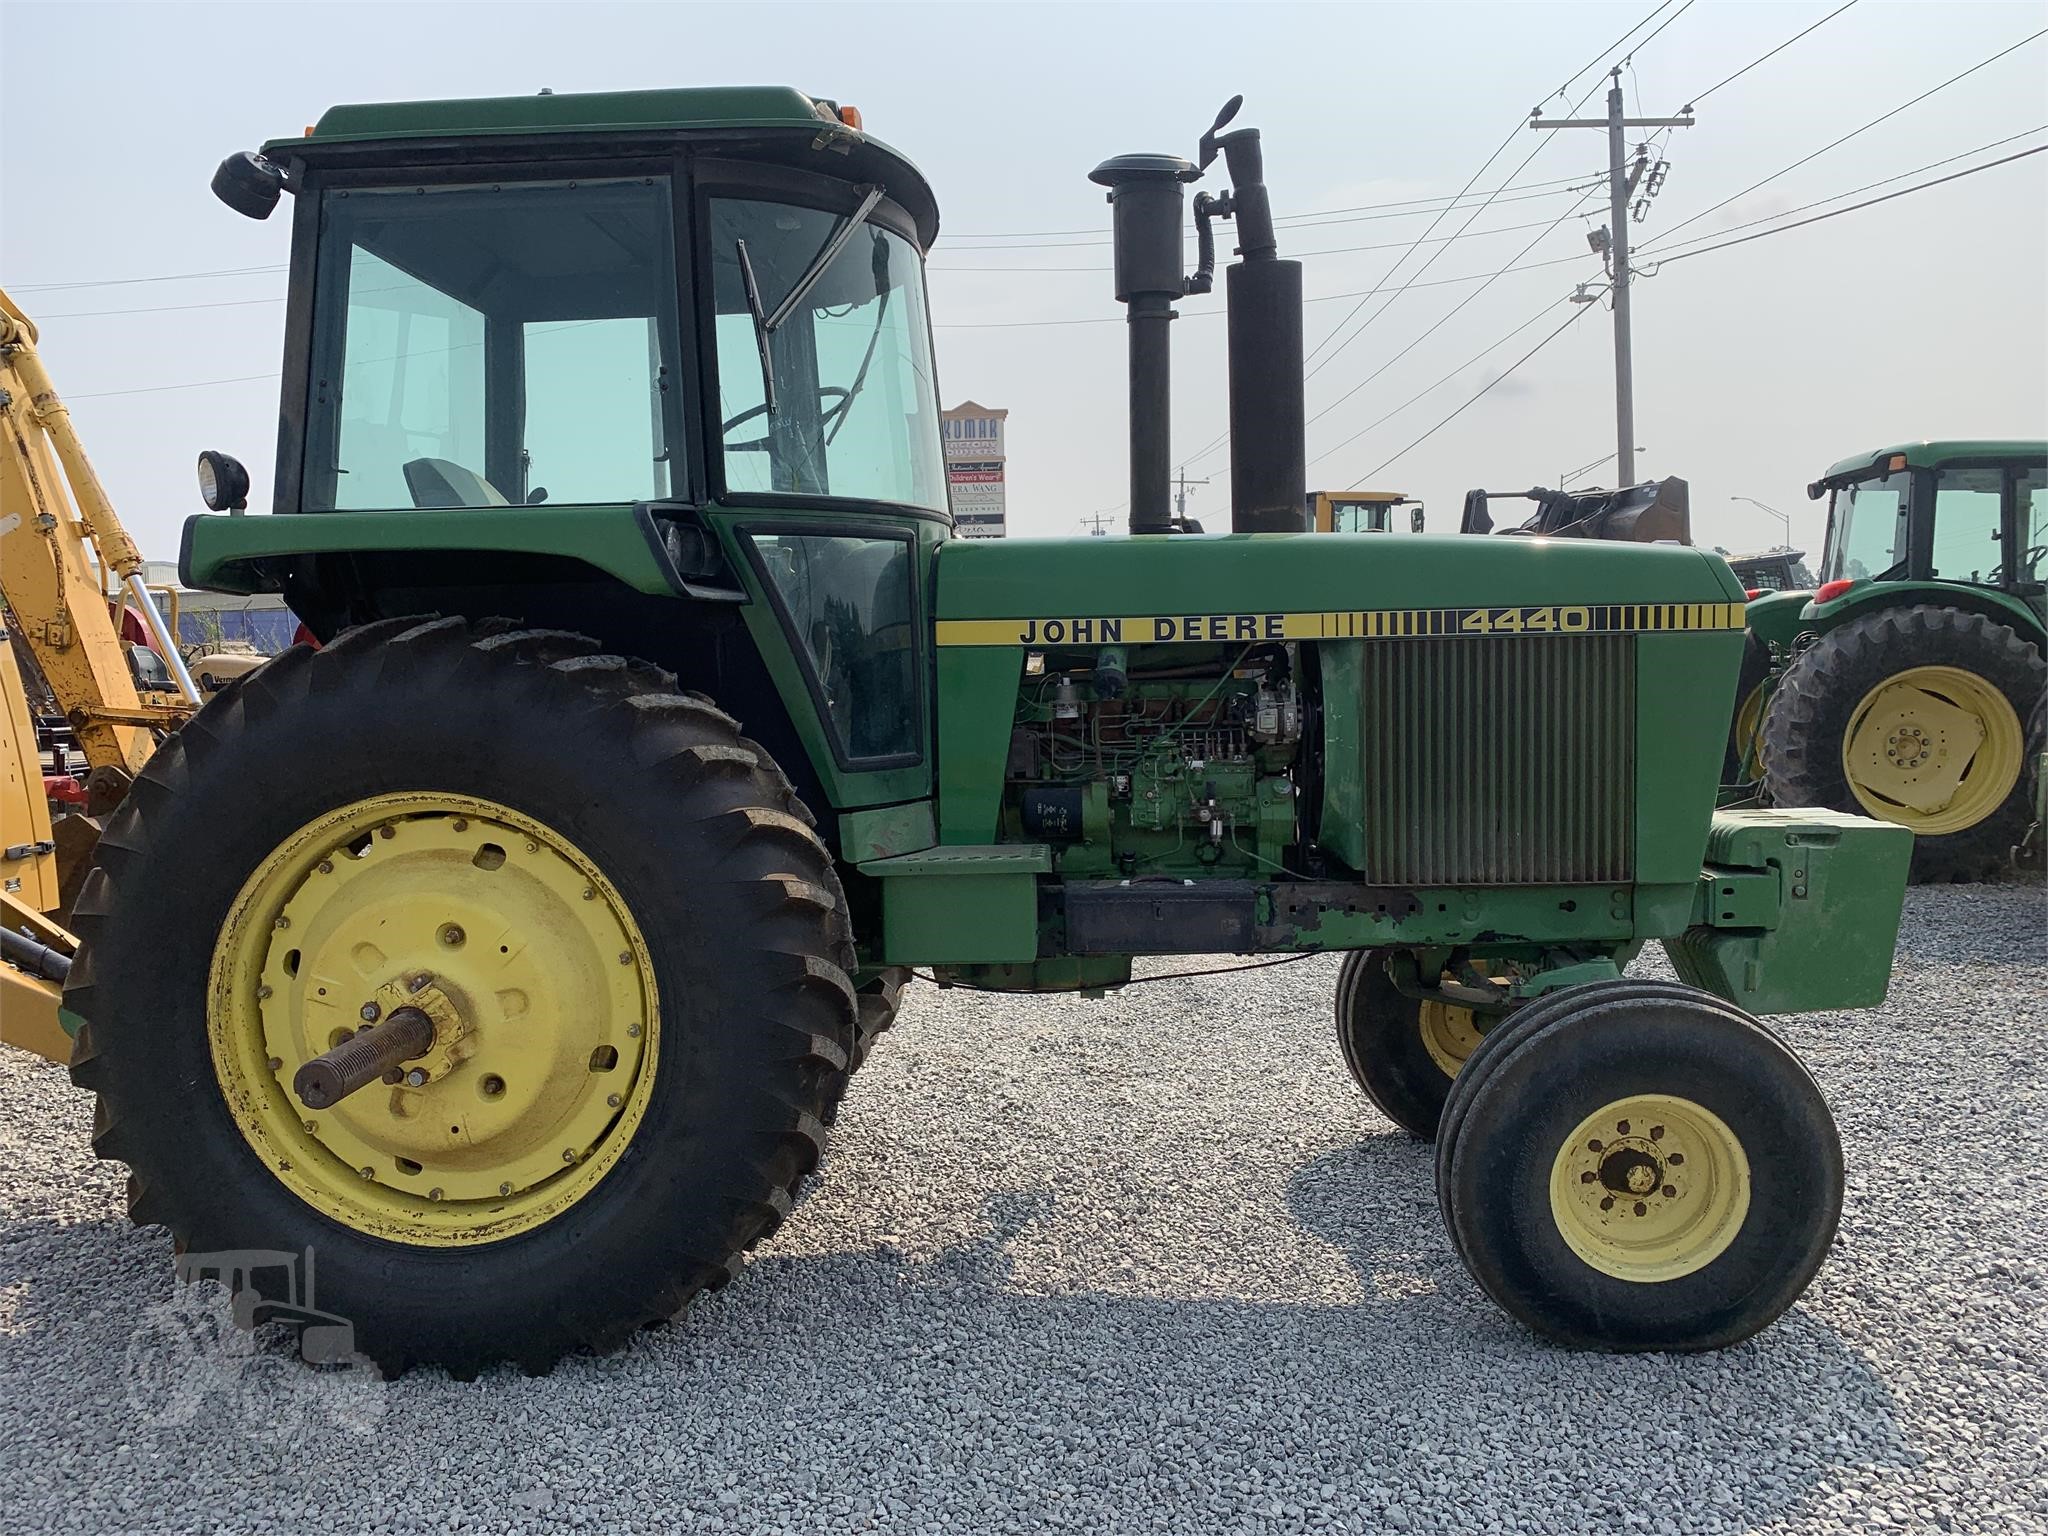 JOHN DEERE 4440 For Sale In Mcalester, Oklahoma | TractorHouse.com